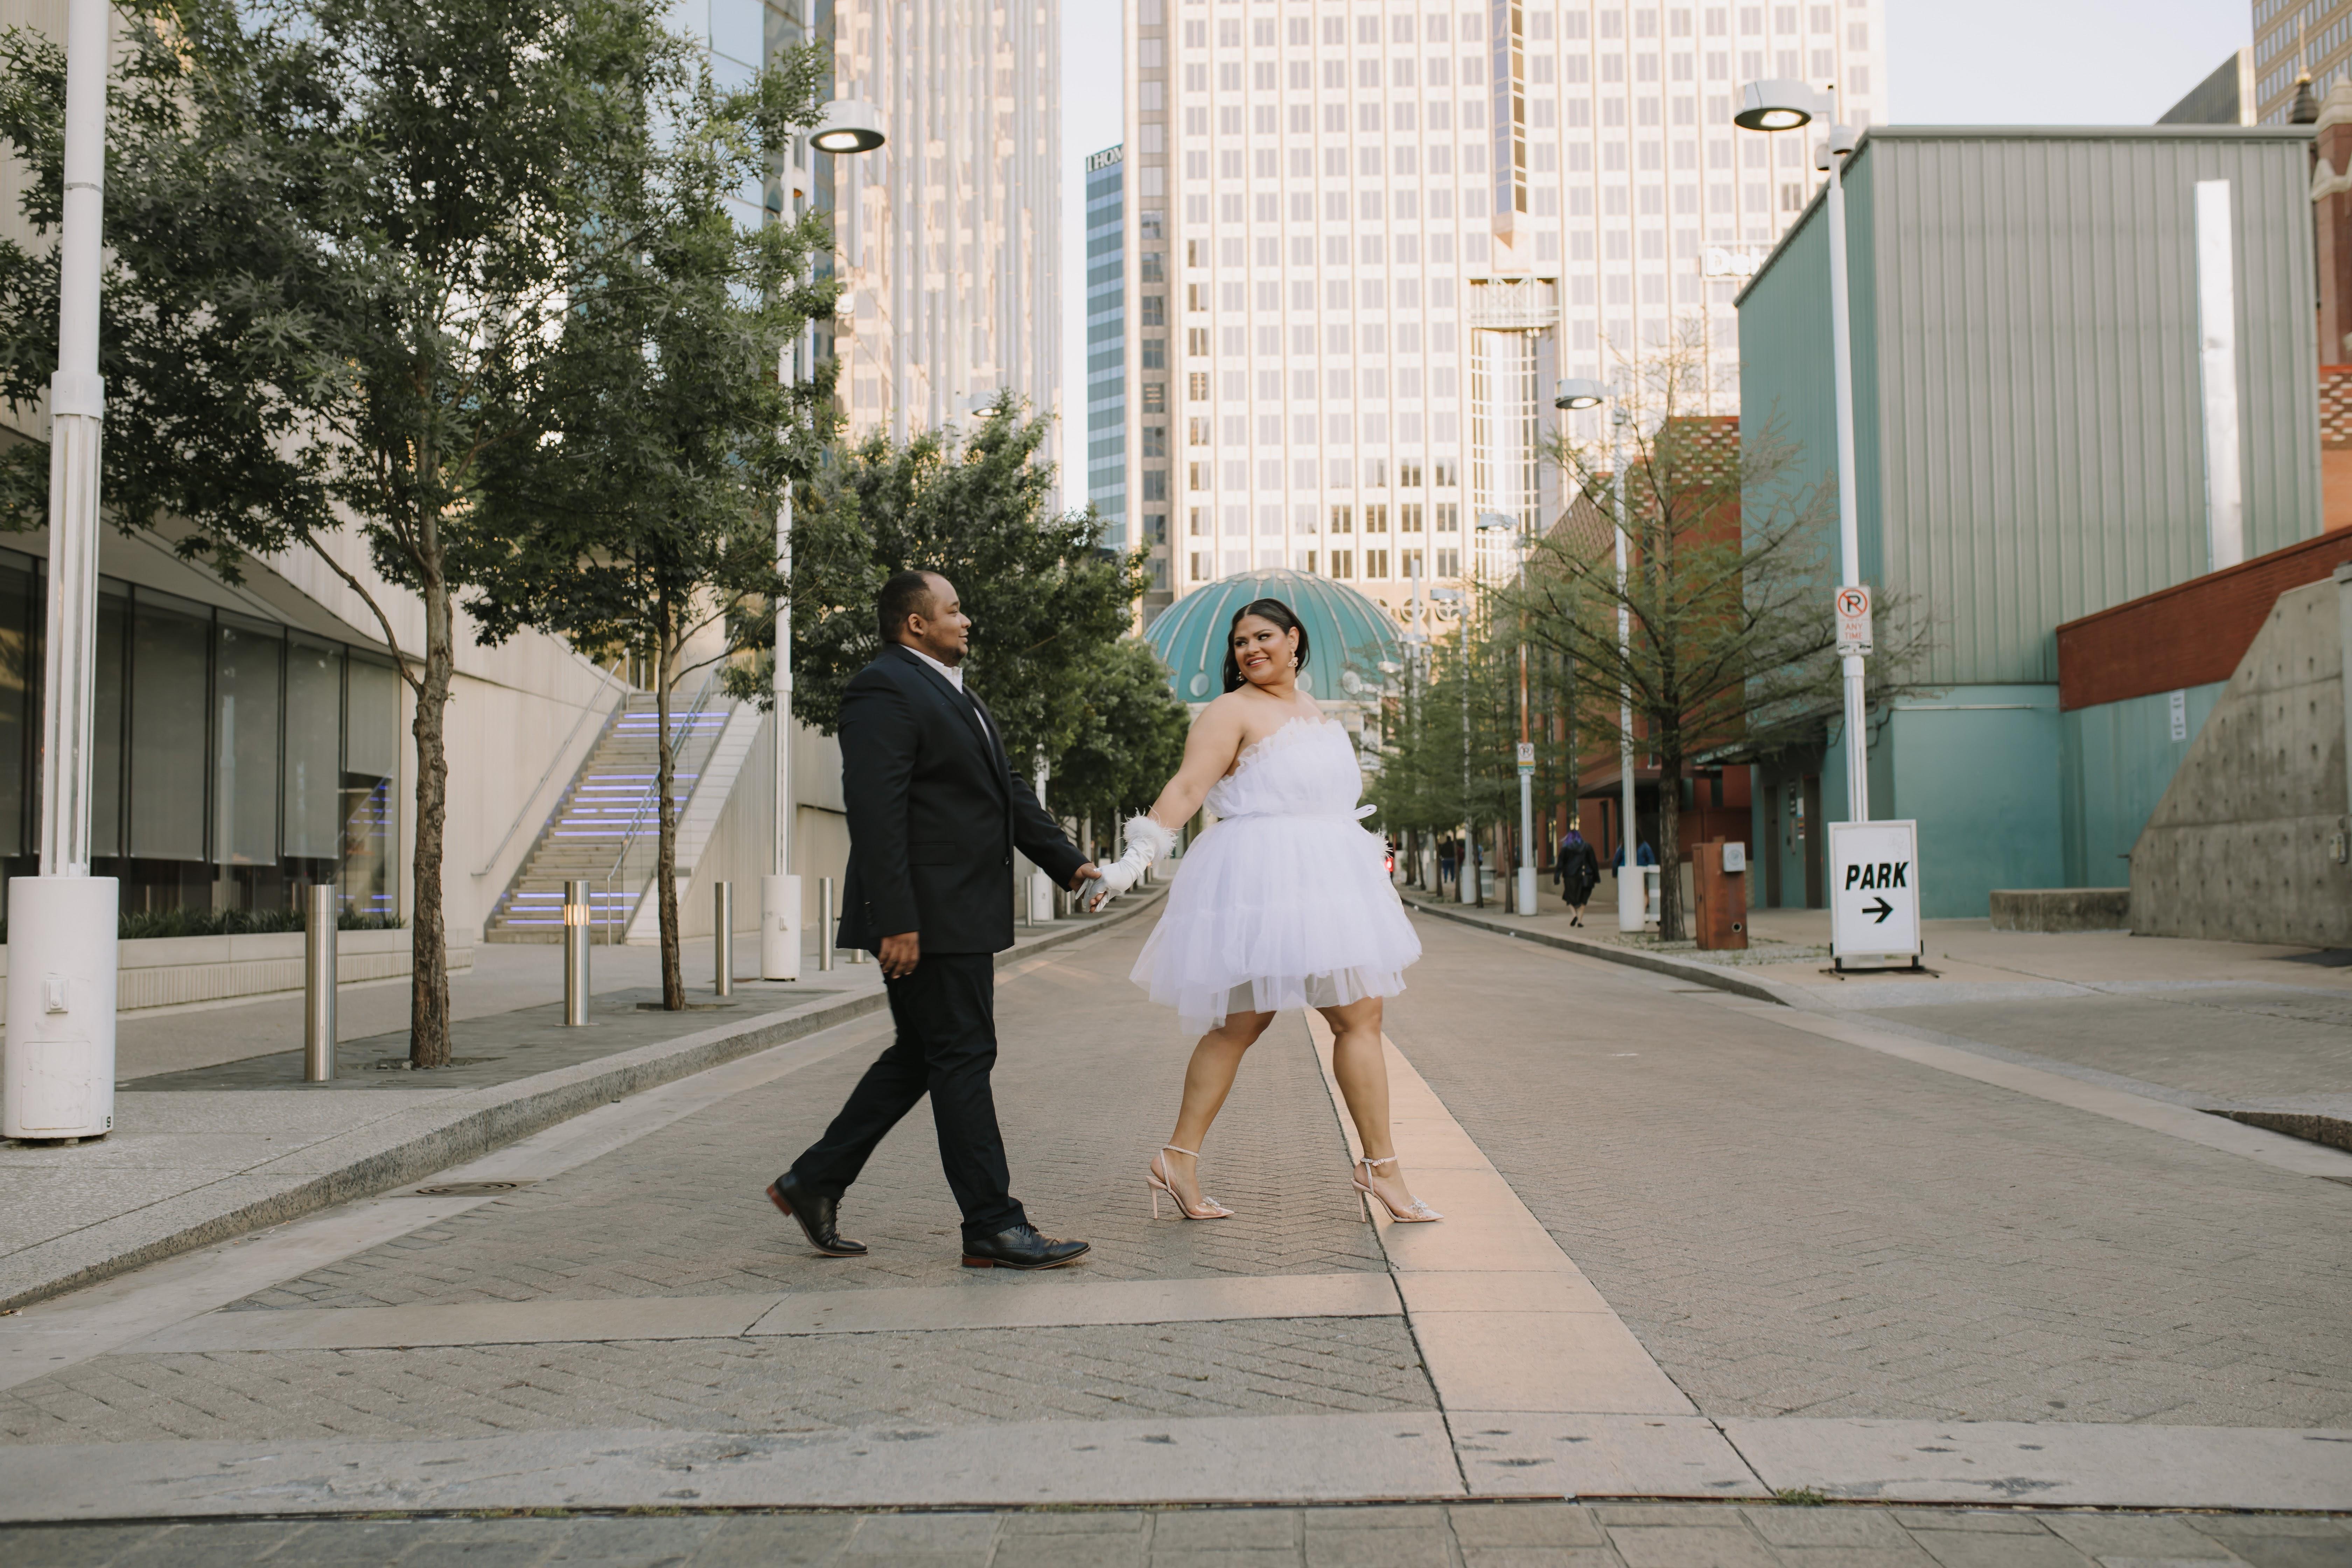 The Wedding Website of Natascha Gray and Damian Gonzales